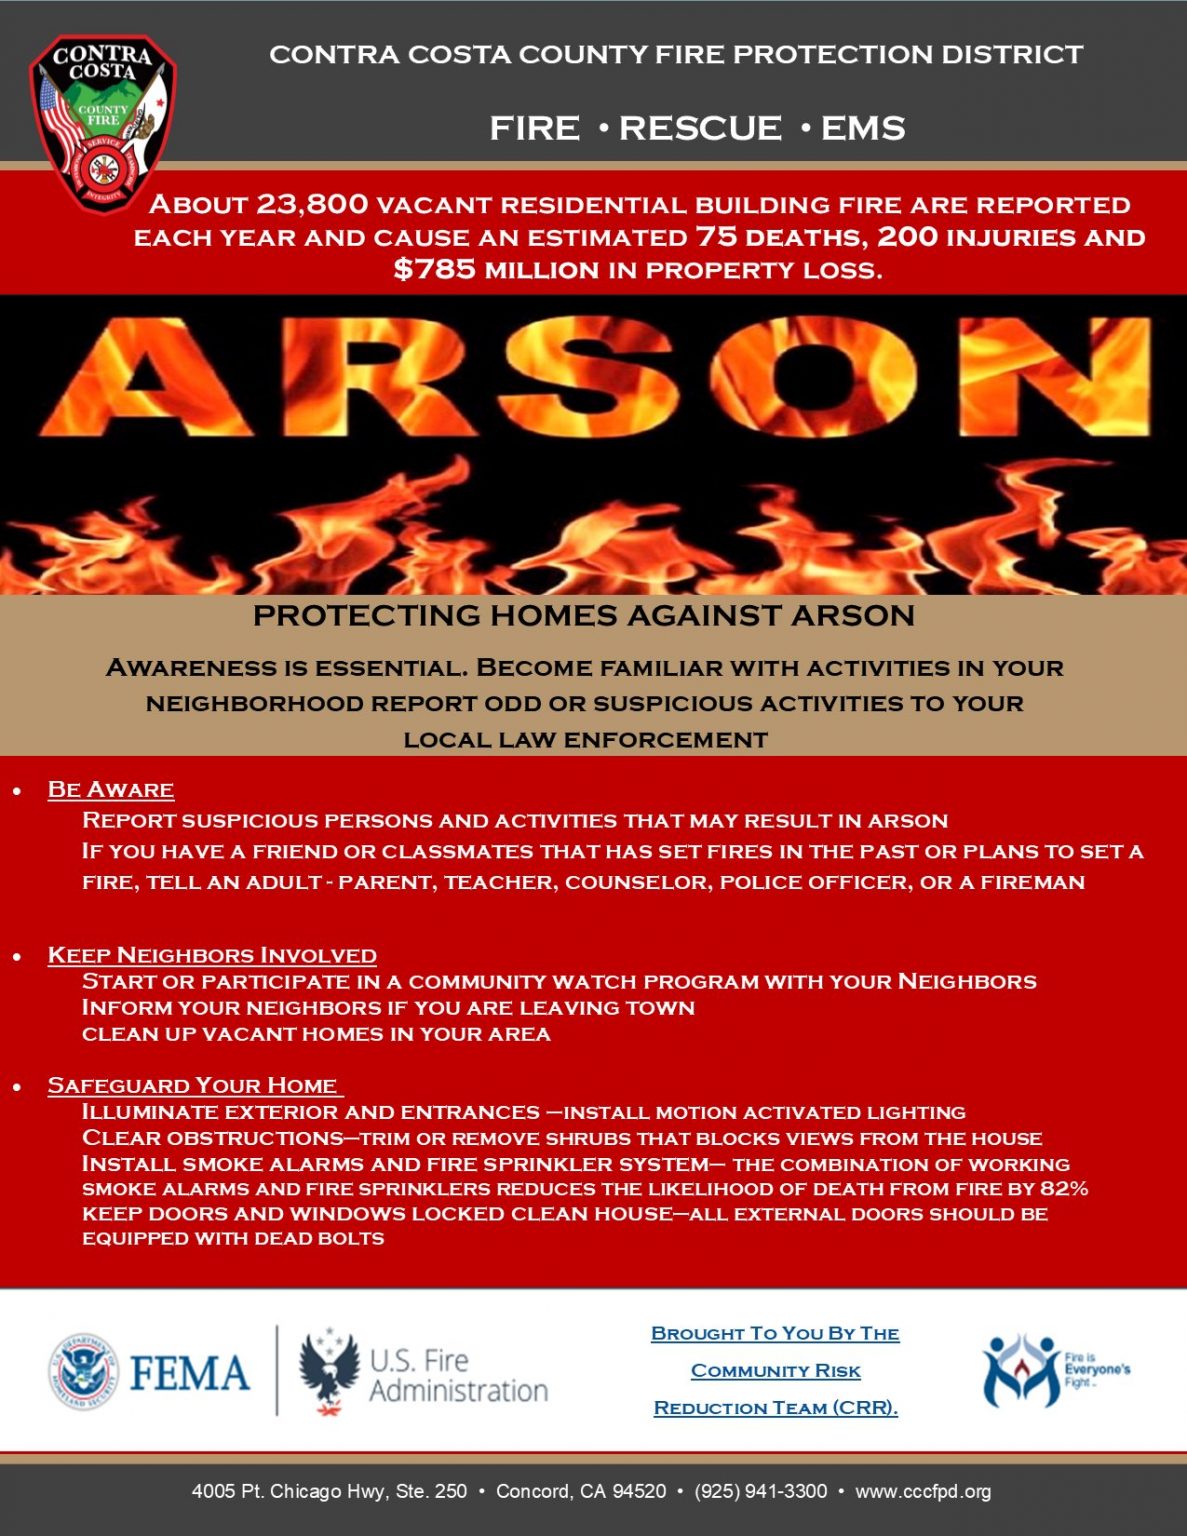 Contra Costa County Fire Protection District's Arson Awareness Week